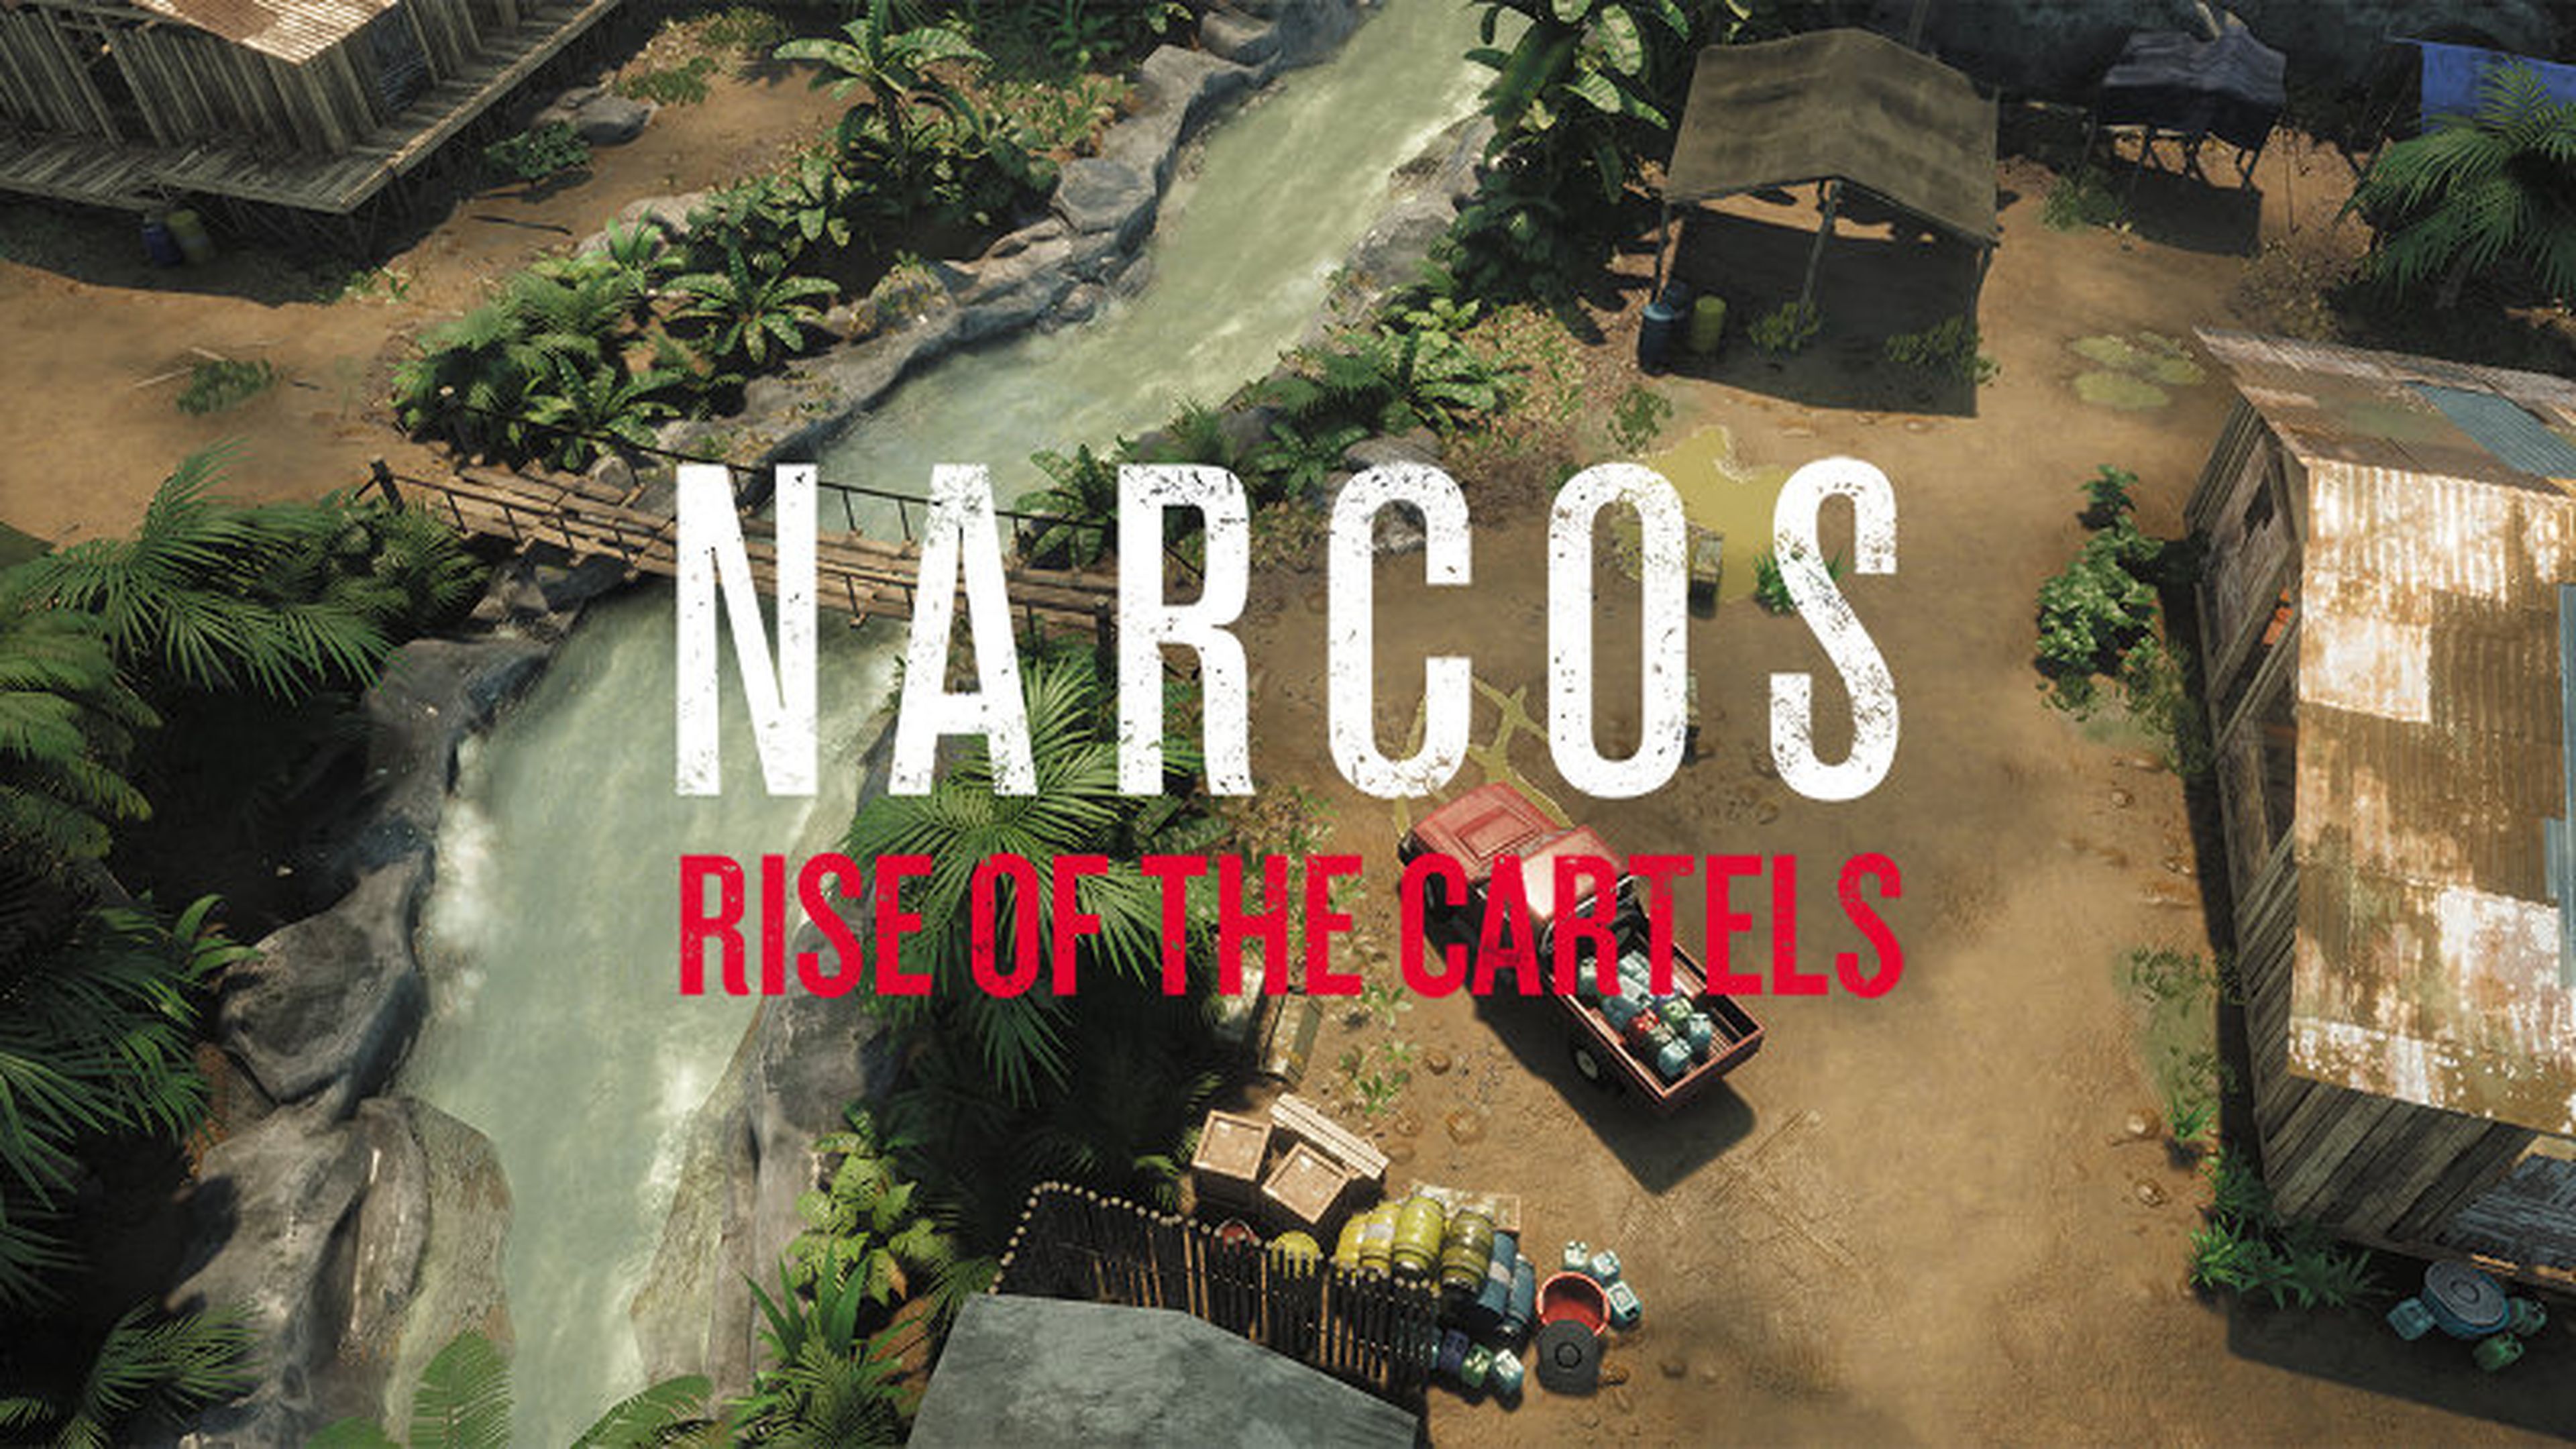 Narchos rise of the cartels